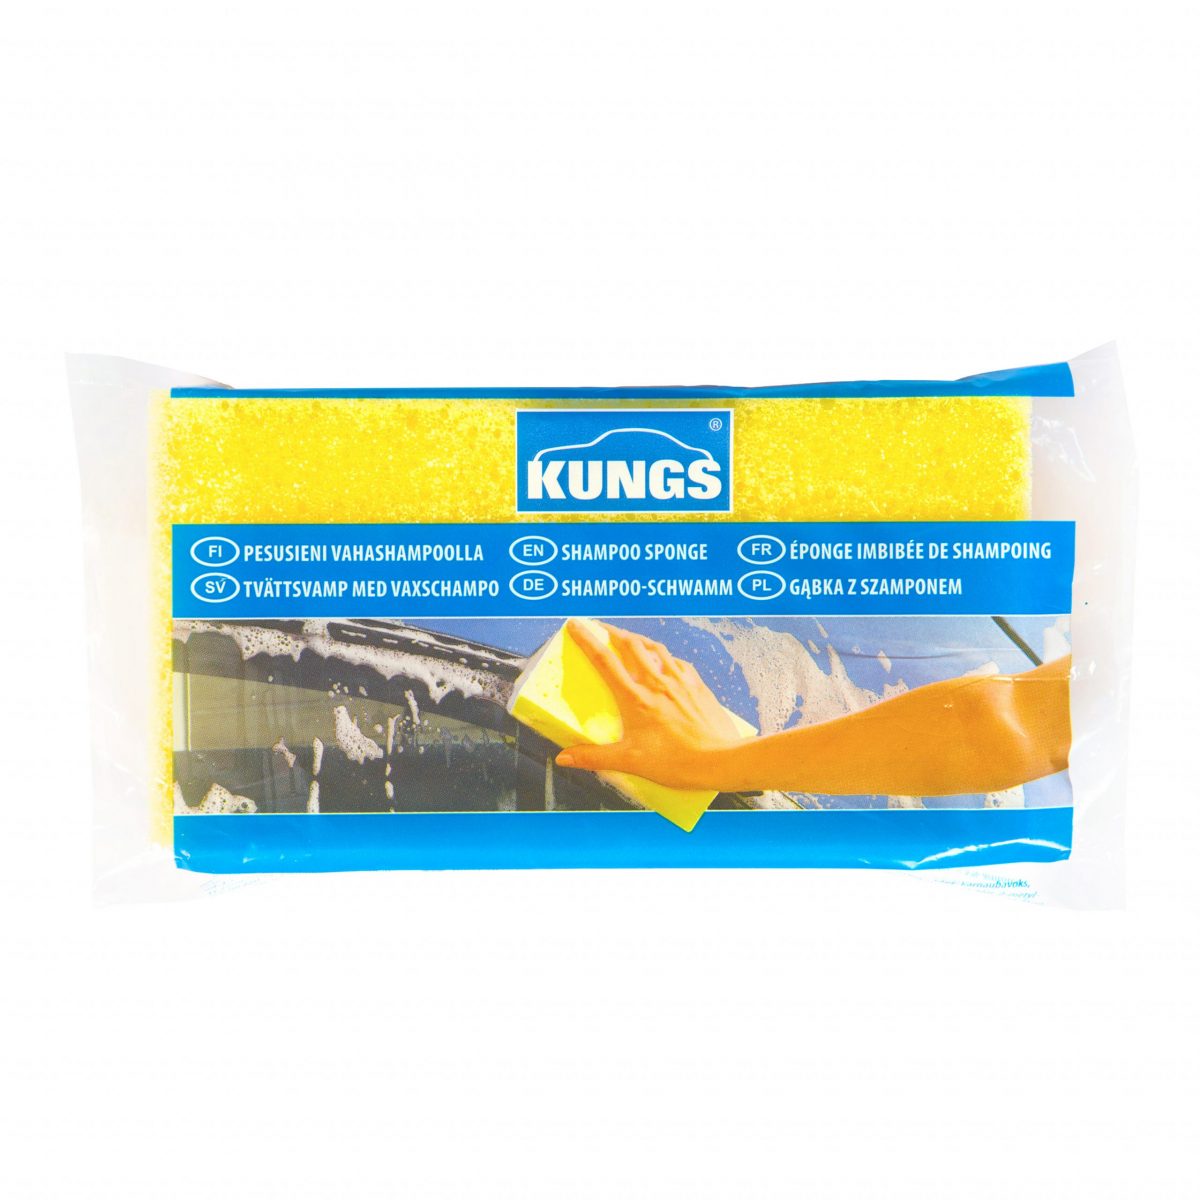 Kungs shampoo sponge for cars and motorcycles